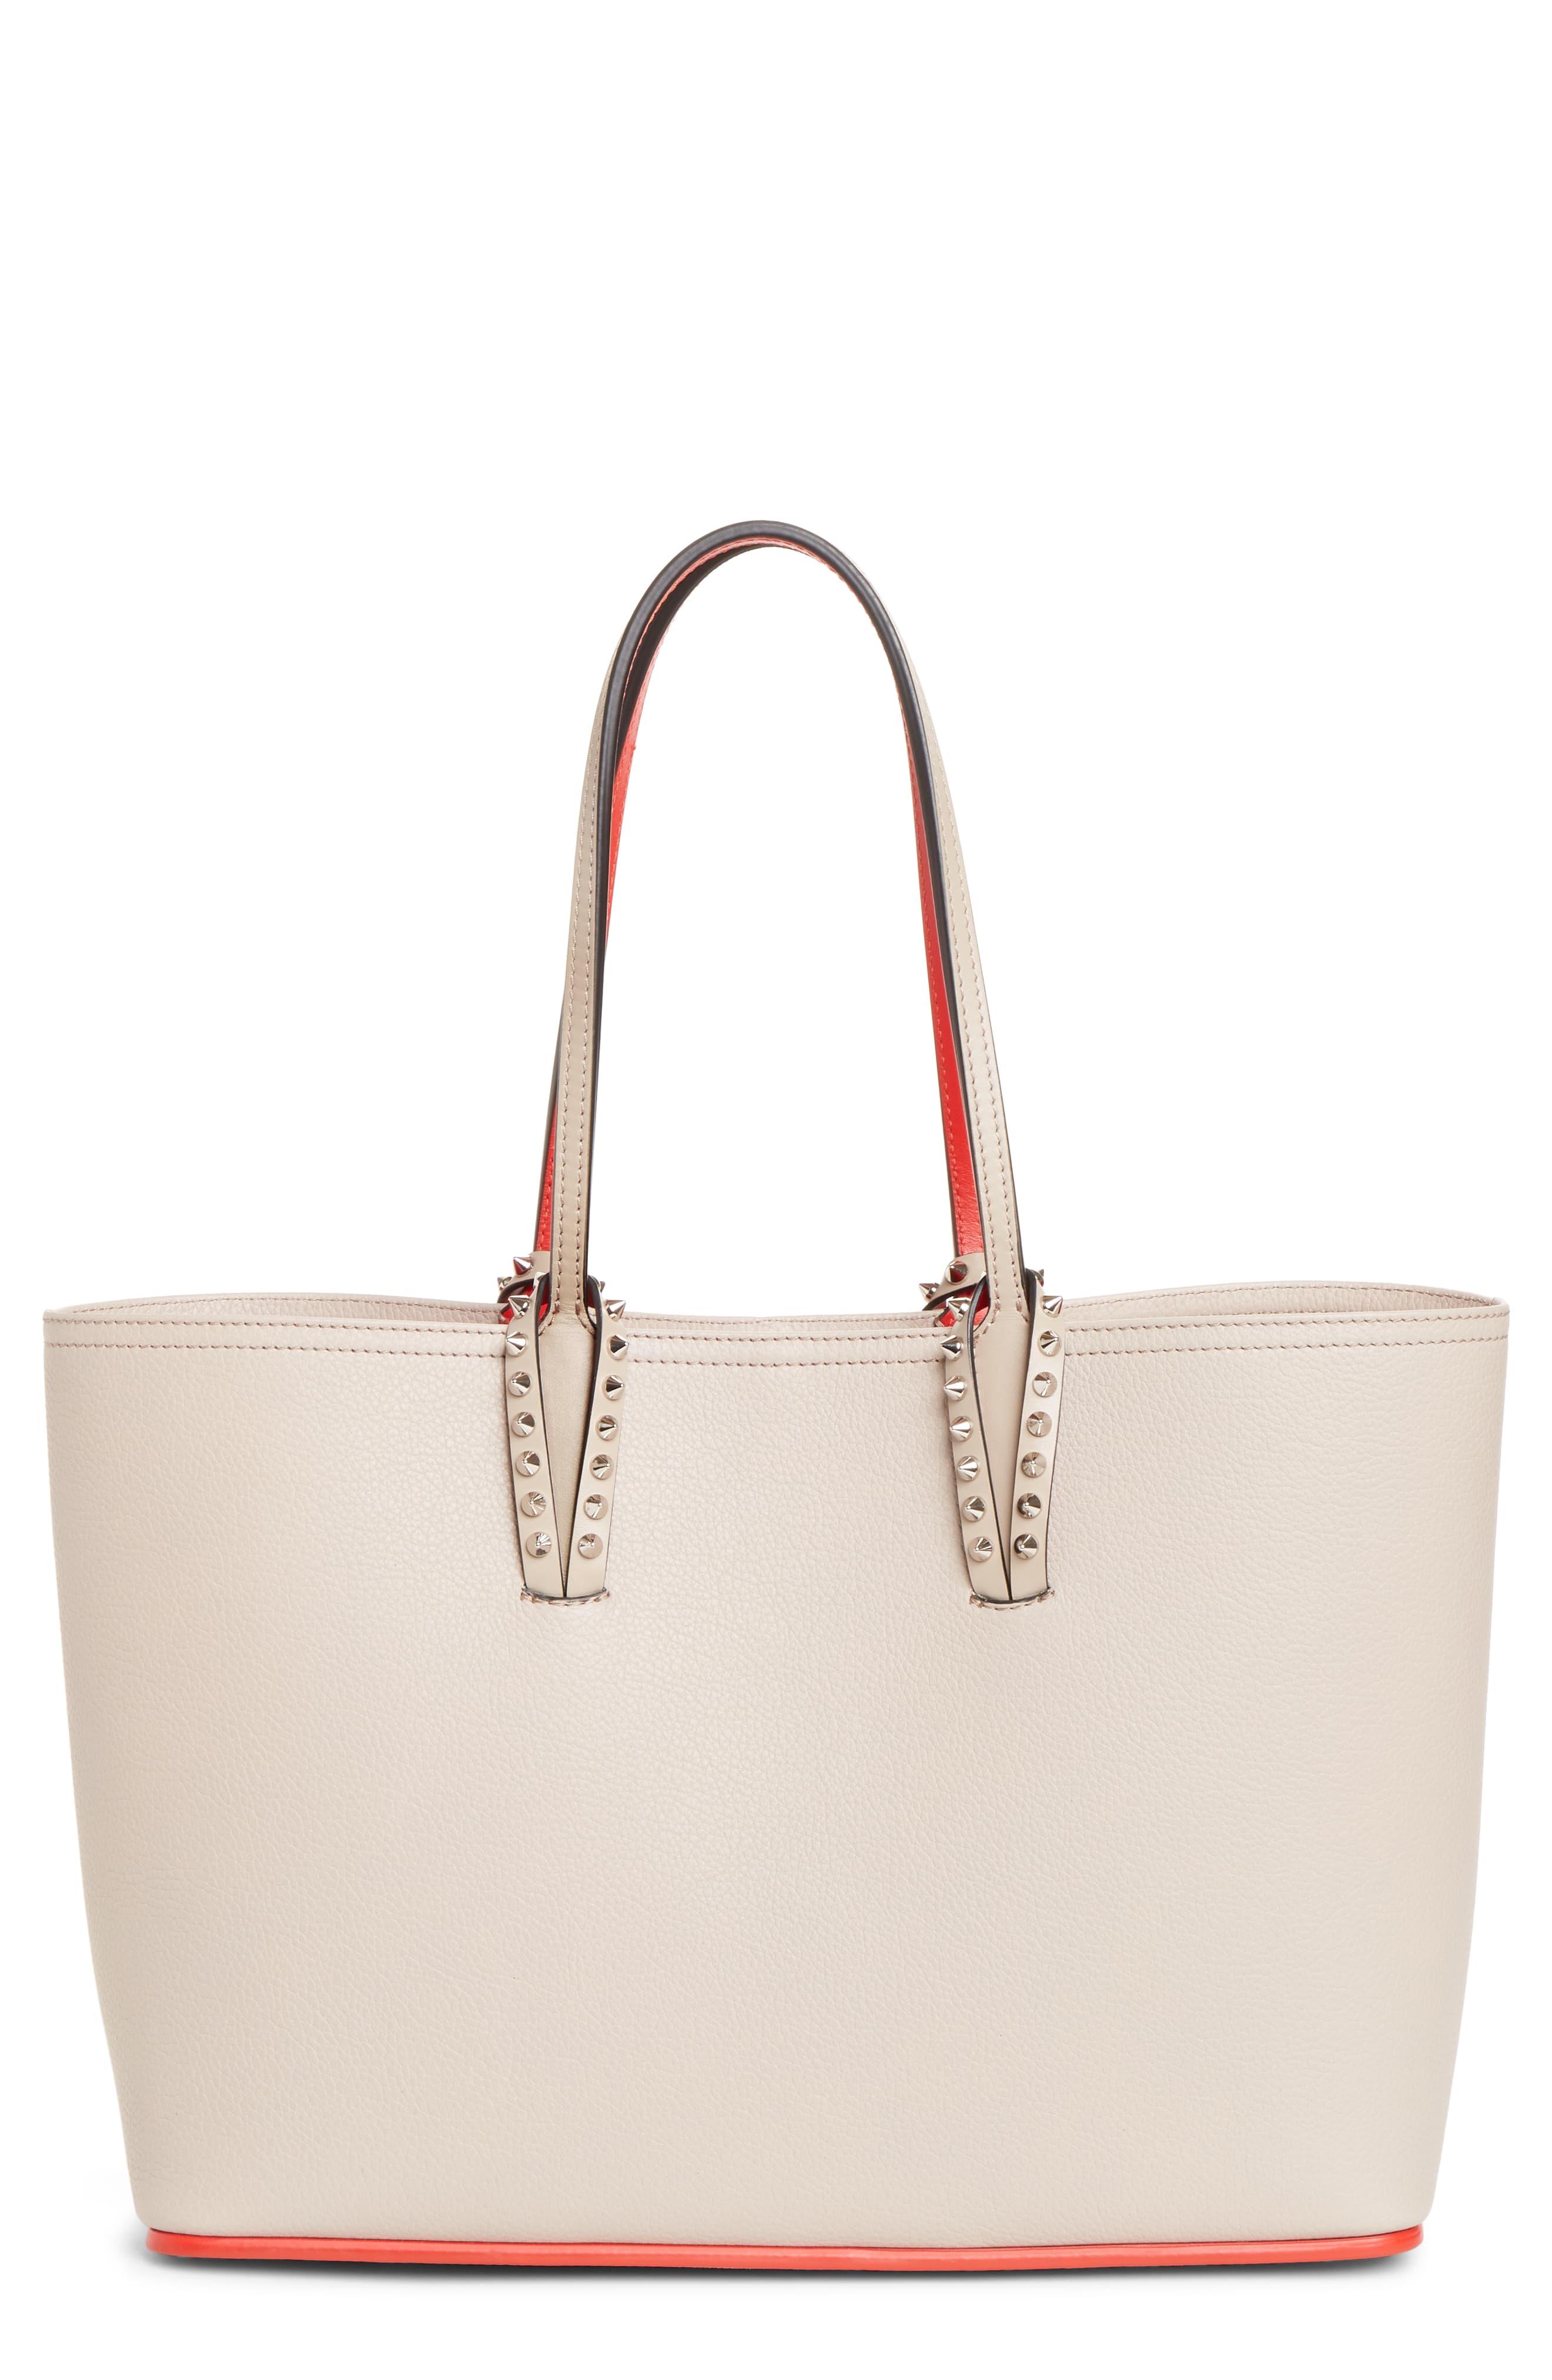 Christian Louboutin Small Cabata Calfskin Leather Tote - Save 15% - Lyst